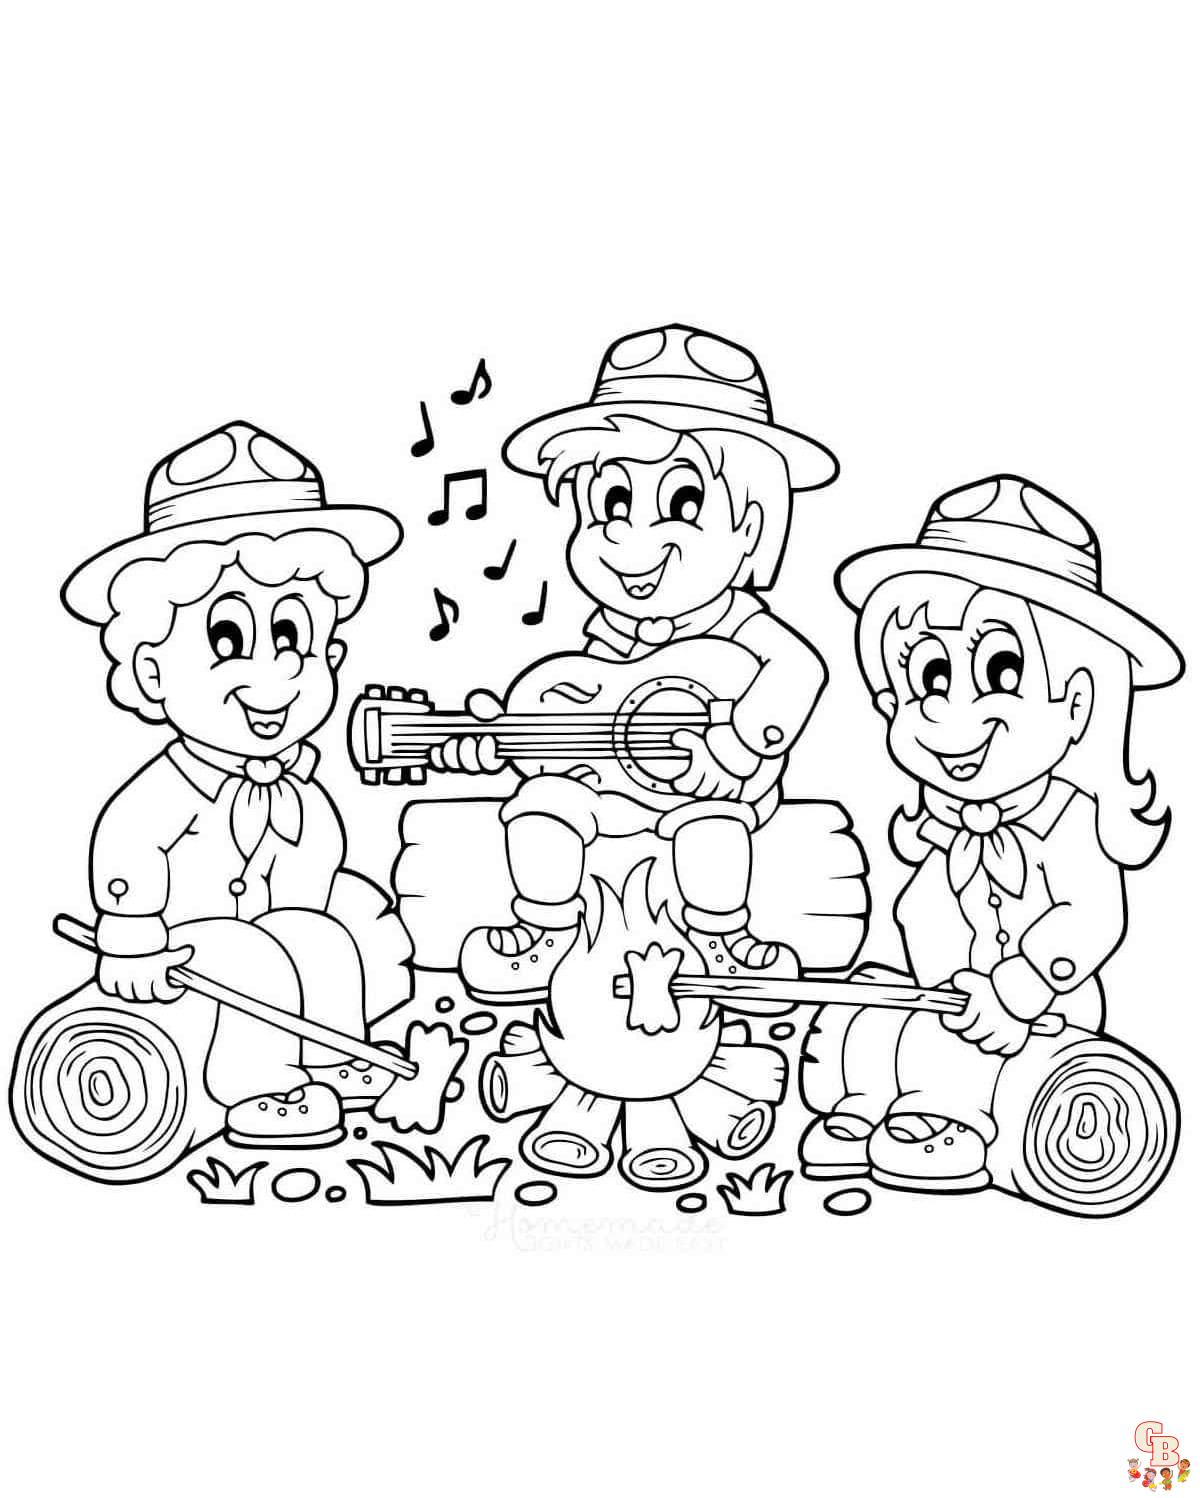 Printable cub scout coloring pages free for kids and adults